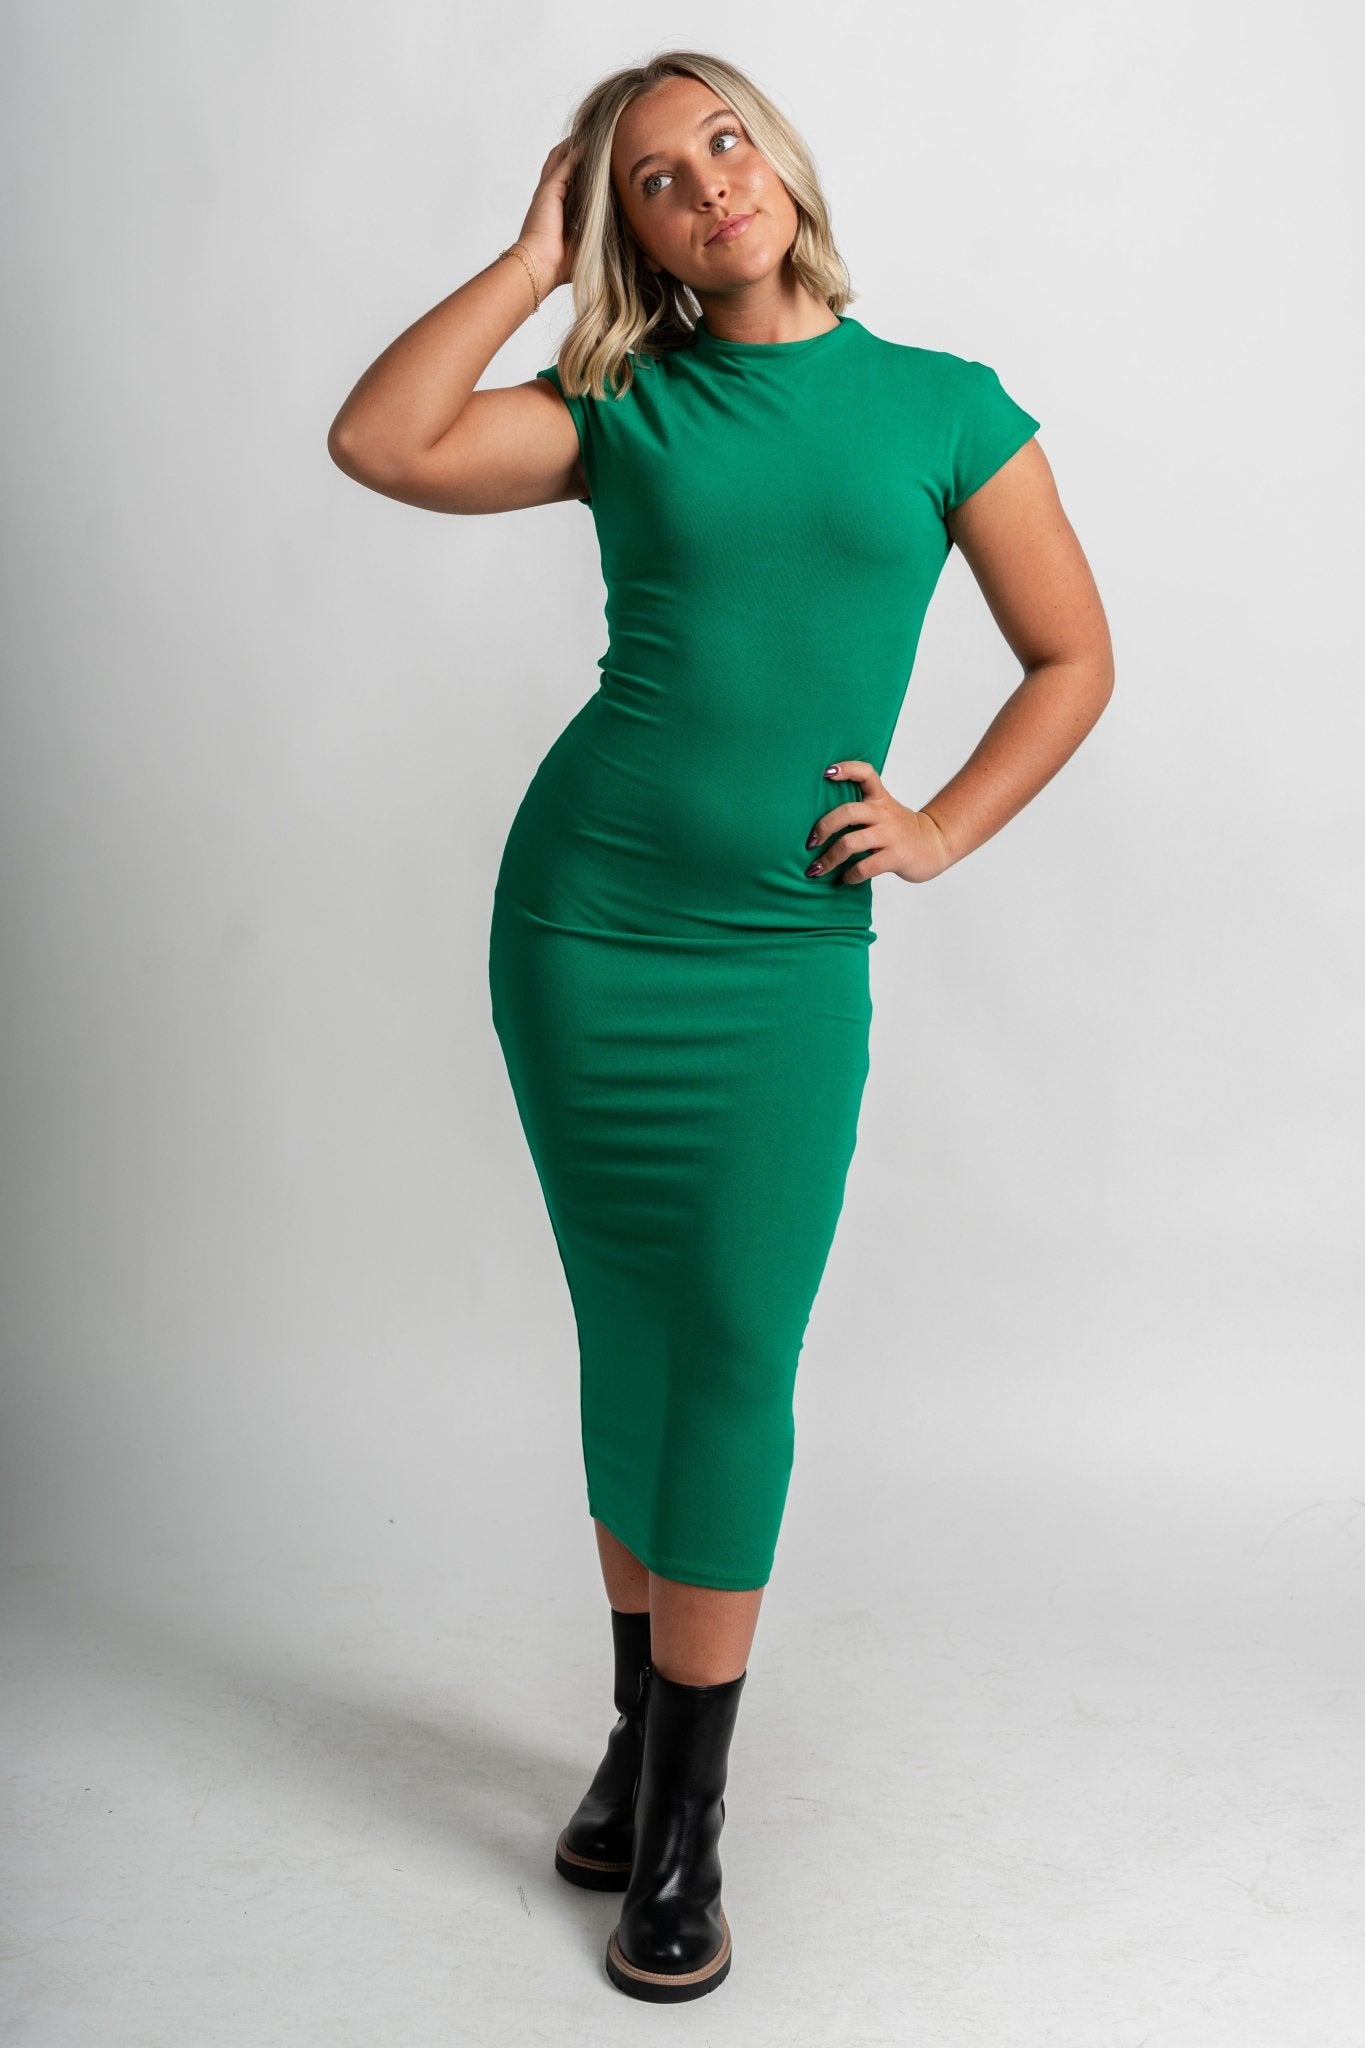 Ribbed midi dress green - Affordable Dress - Boutique Dresses at Lush Fashion Lounge Boutique in Oklahoma City